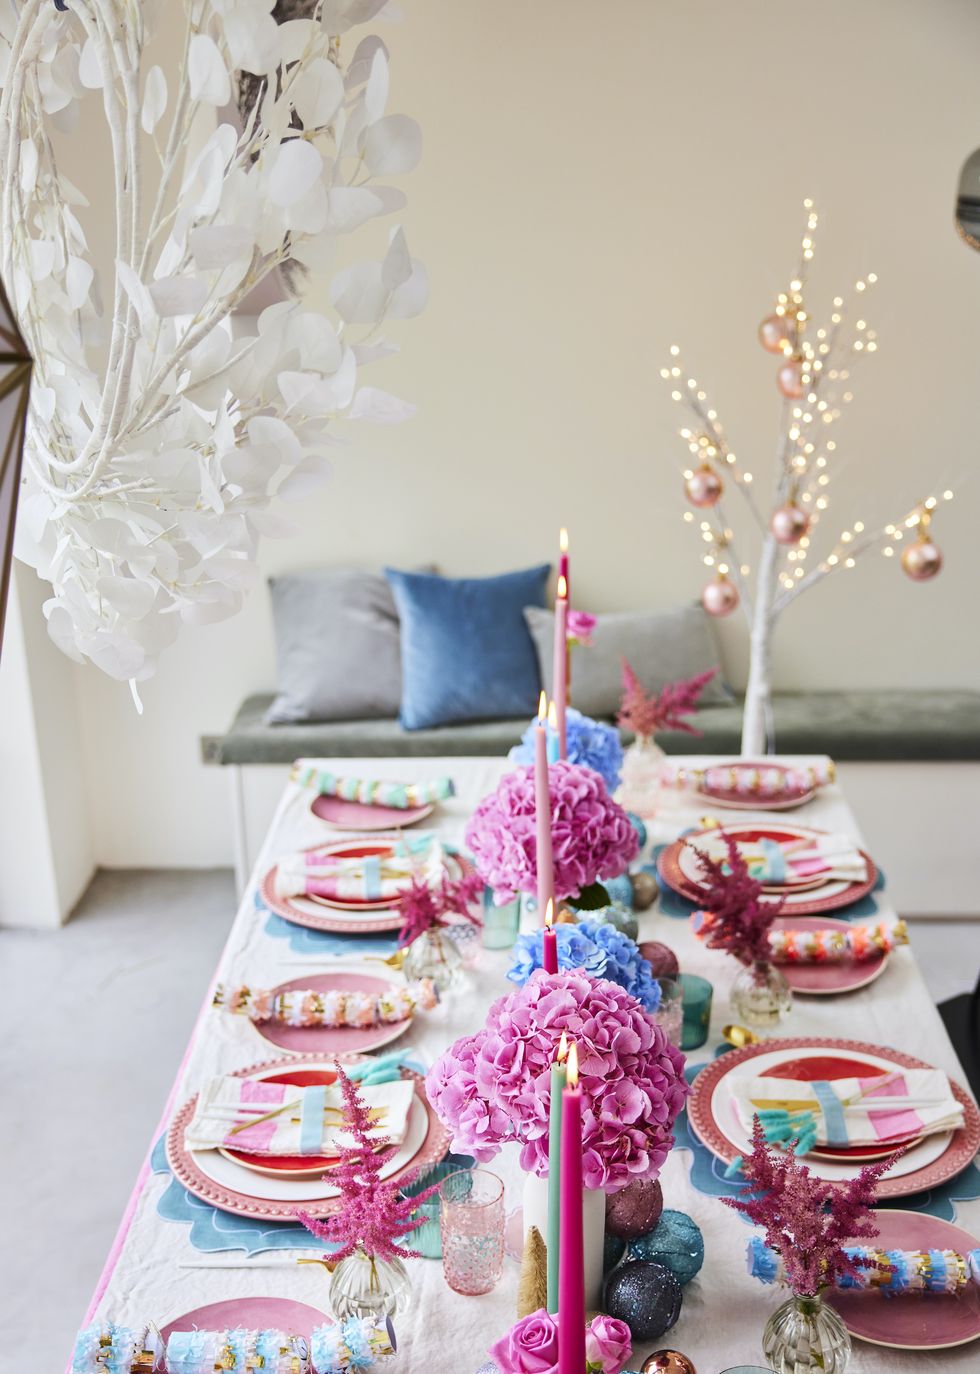 https://hips.hearstapps.com/hmg-prod/images/christmas-tablescaping-grown-up-pastels-table-1-style-inspiration-1638961322.jpg?crop=0.991xw:0.927xh;0,0.0726xh&resize=980:*